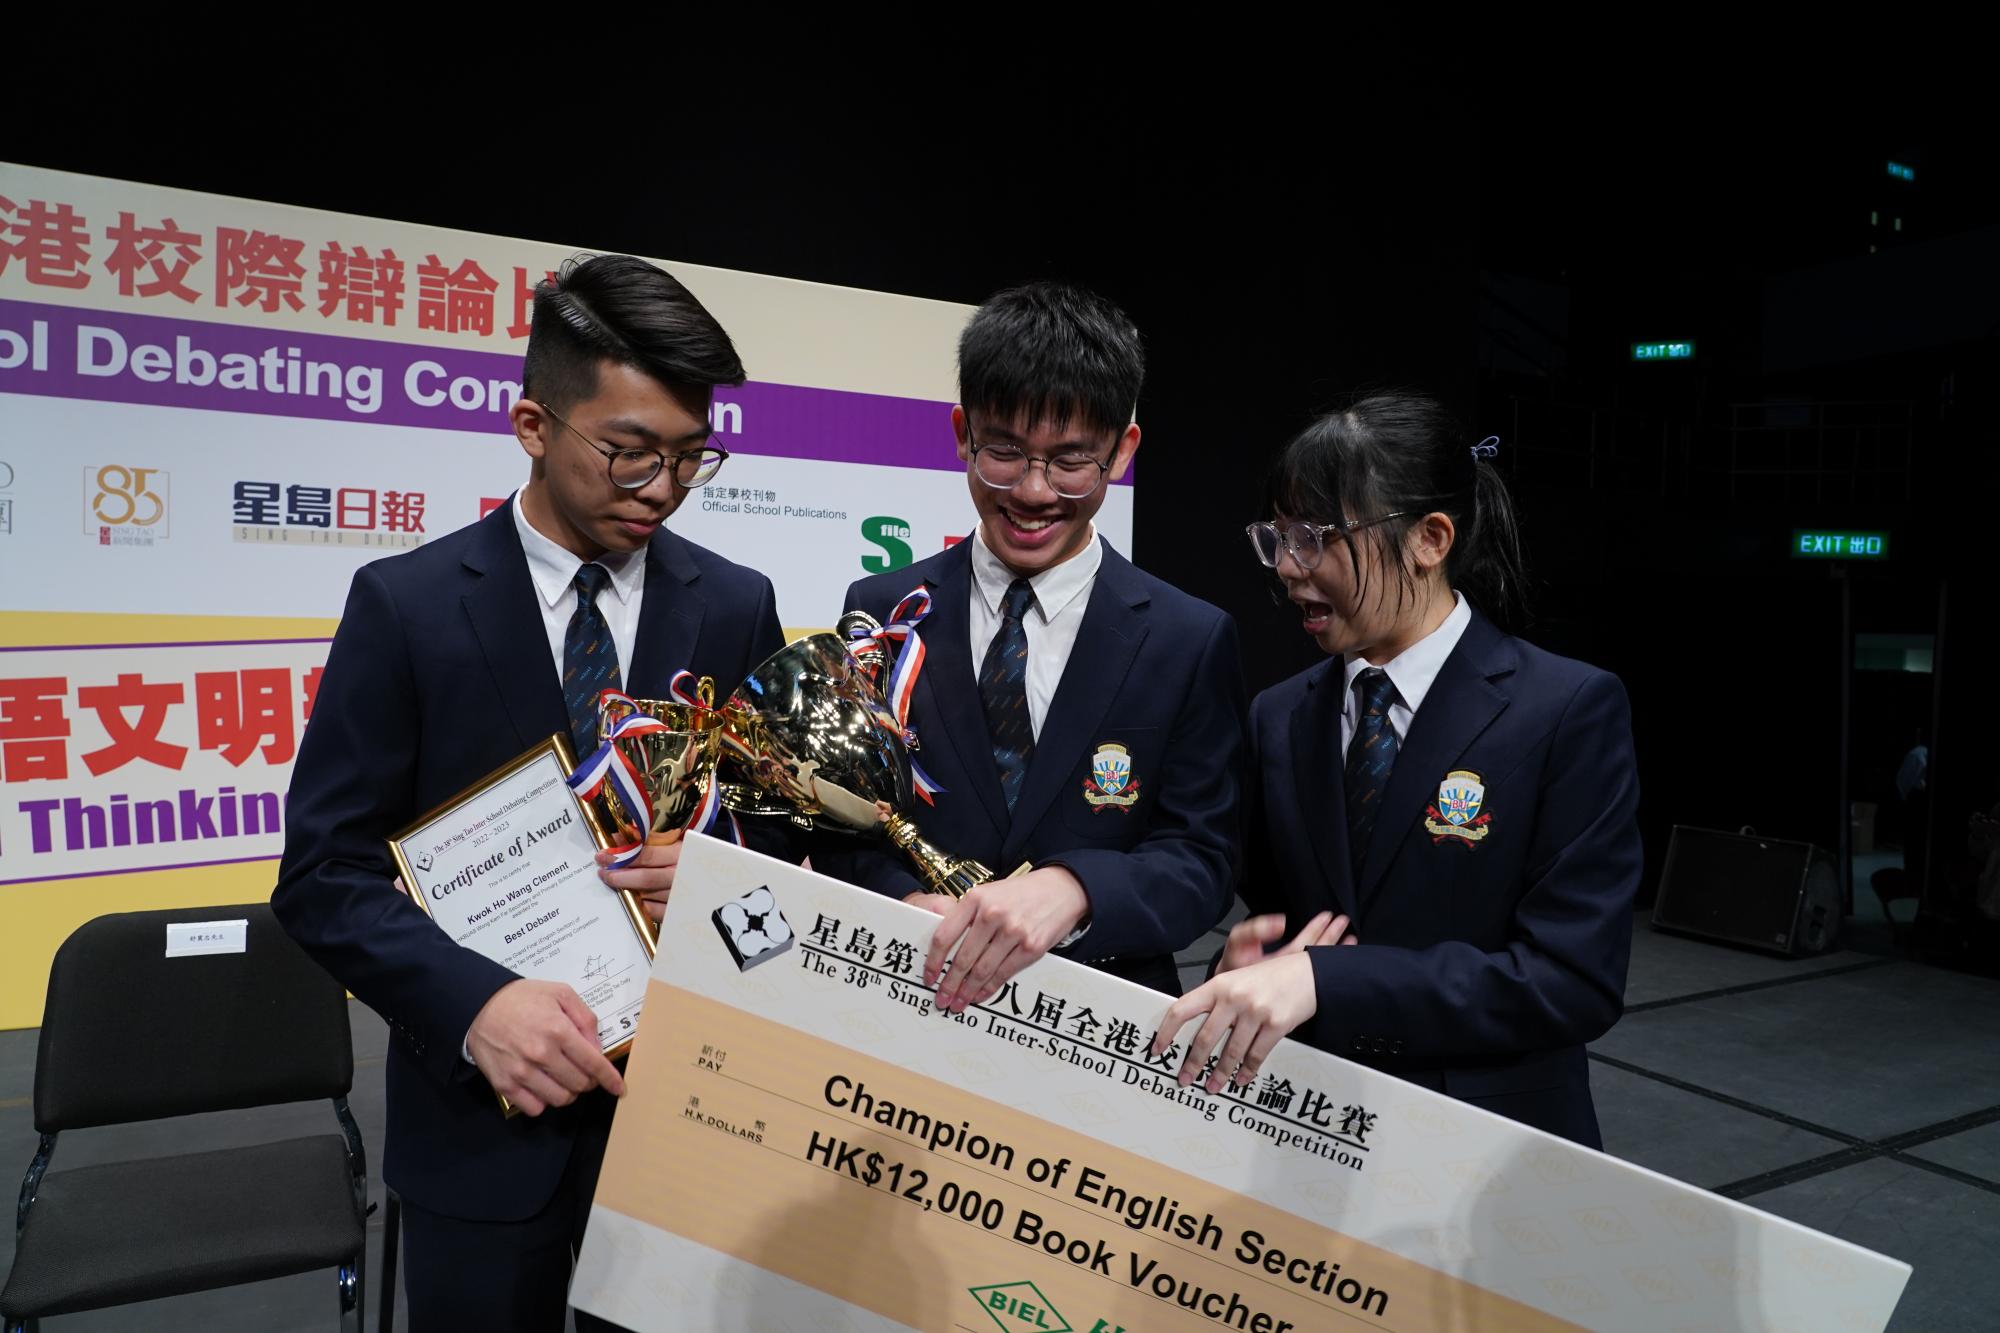 Our students were crowned Champion of The 37th & 38th Sing Tao Inter-School Debating  Competition (English Section) two years in a row.